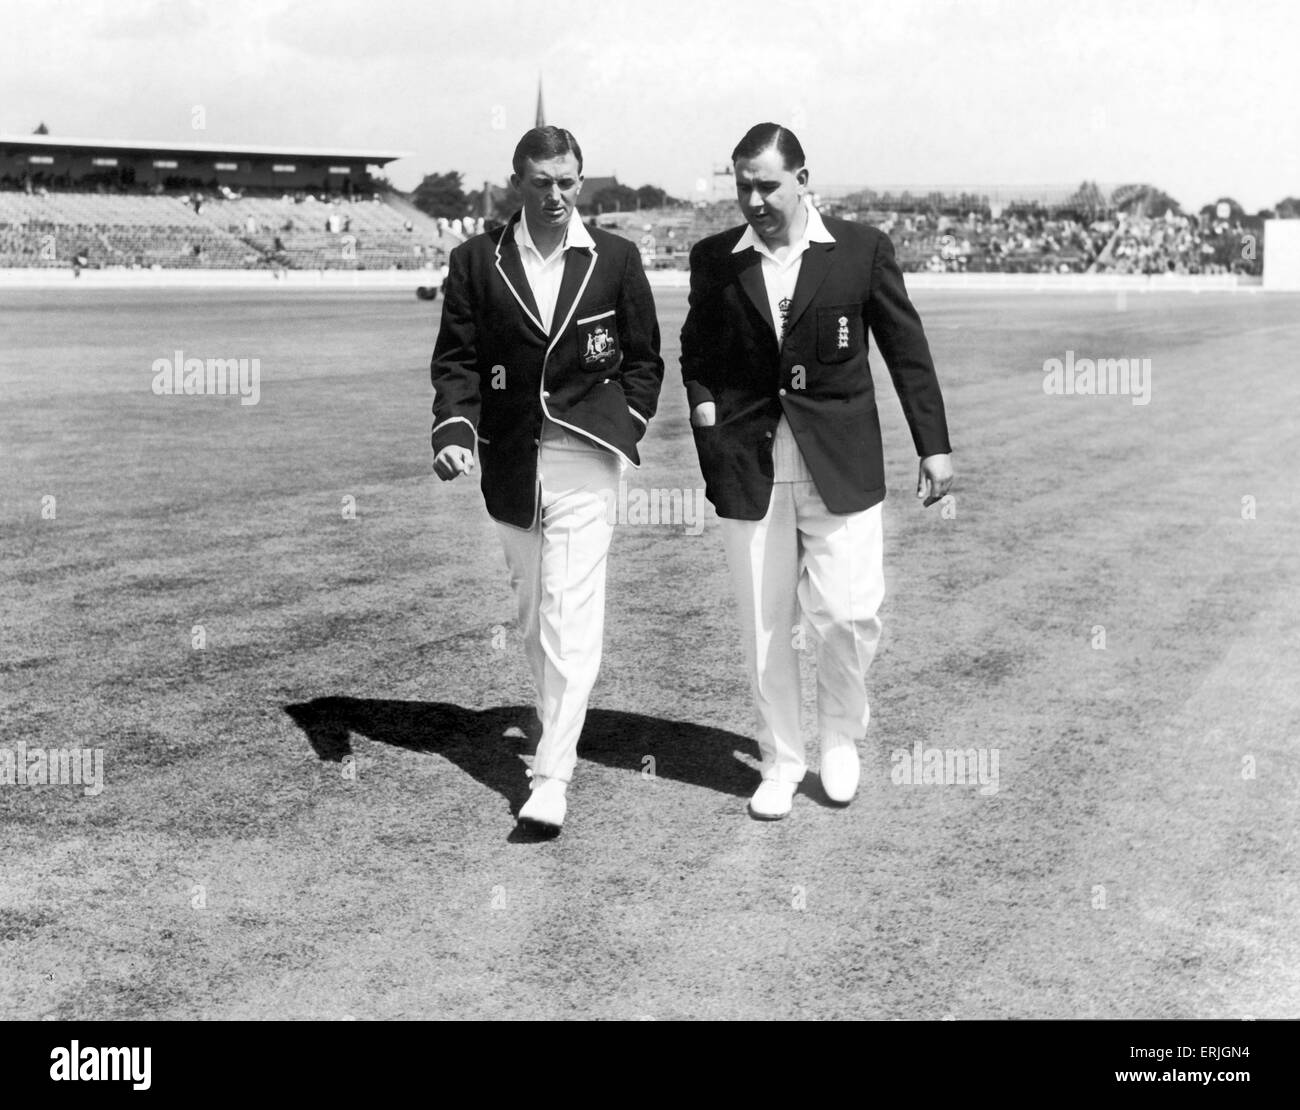 Australian cricket tour of England for the Ashes. England v Australia First Test match at Edgbaston. the two captains inspect the pitch before the match.  They are Richie Benaud of Australia (left) and Colin Cowdrey of England.  June 1961. Stock Photo